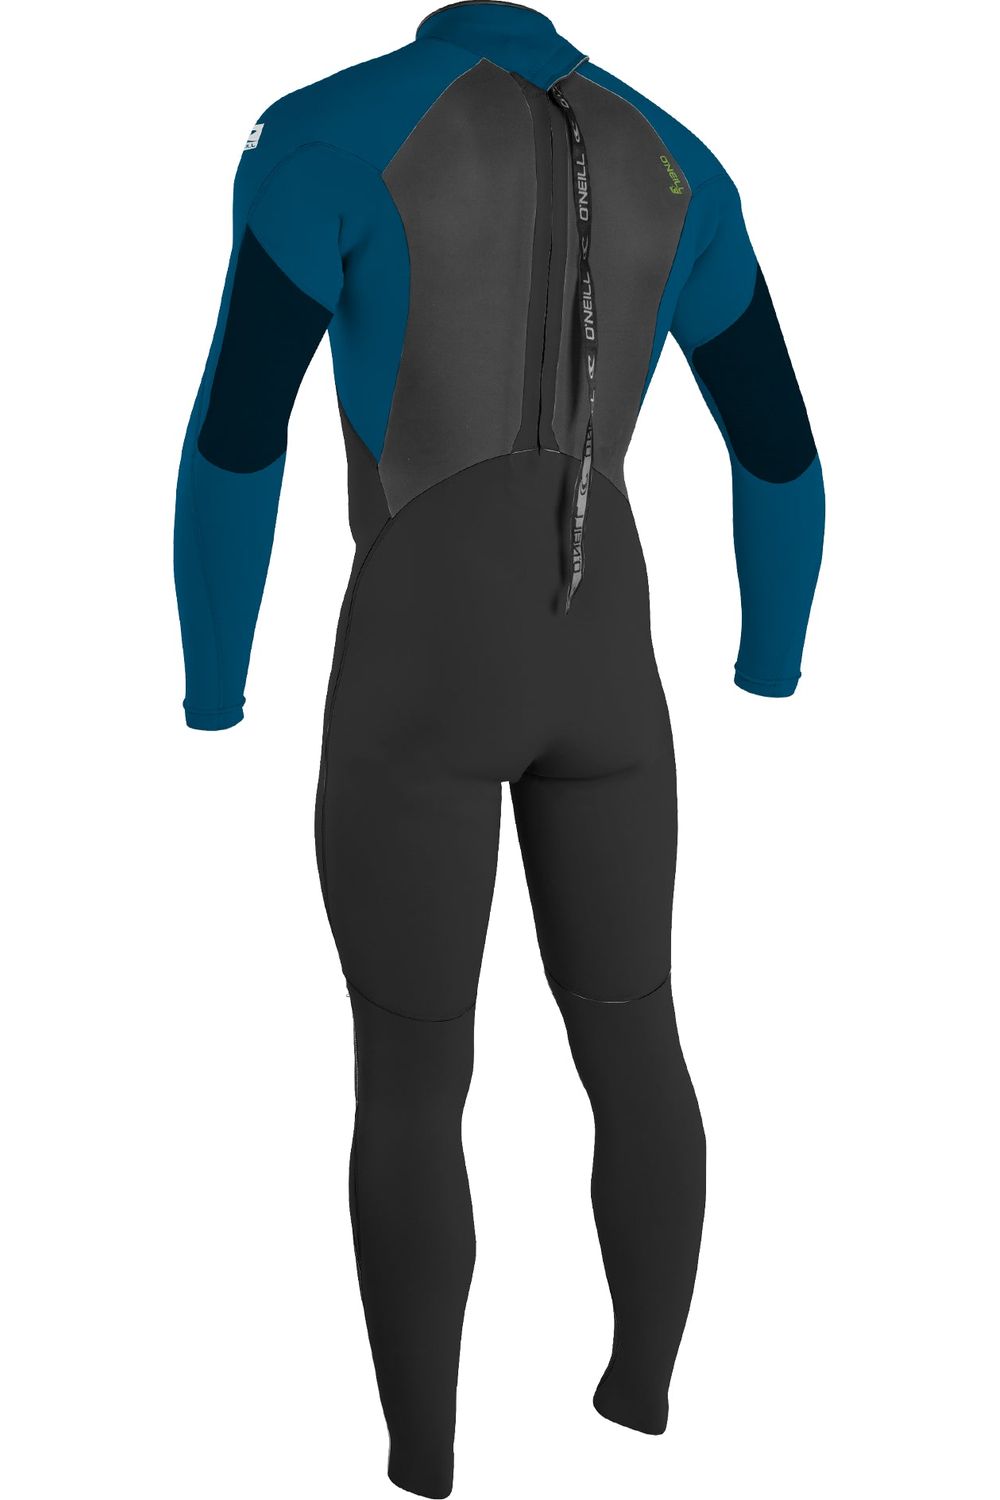 O'Neill Epic Youth Wetsuit 4/3 Back Zip Black Blue Dayglo